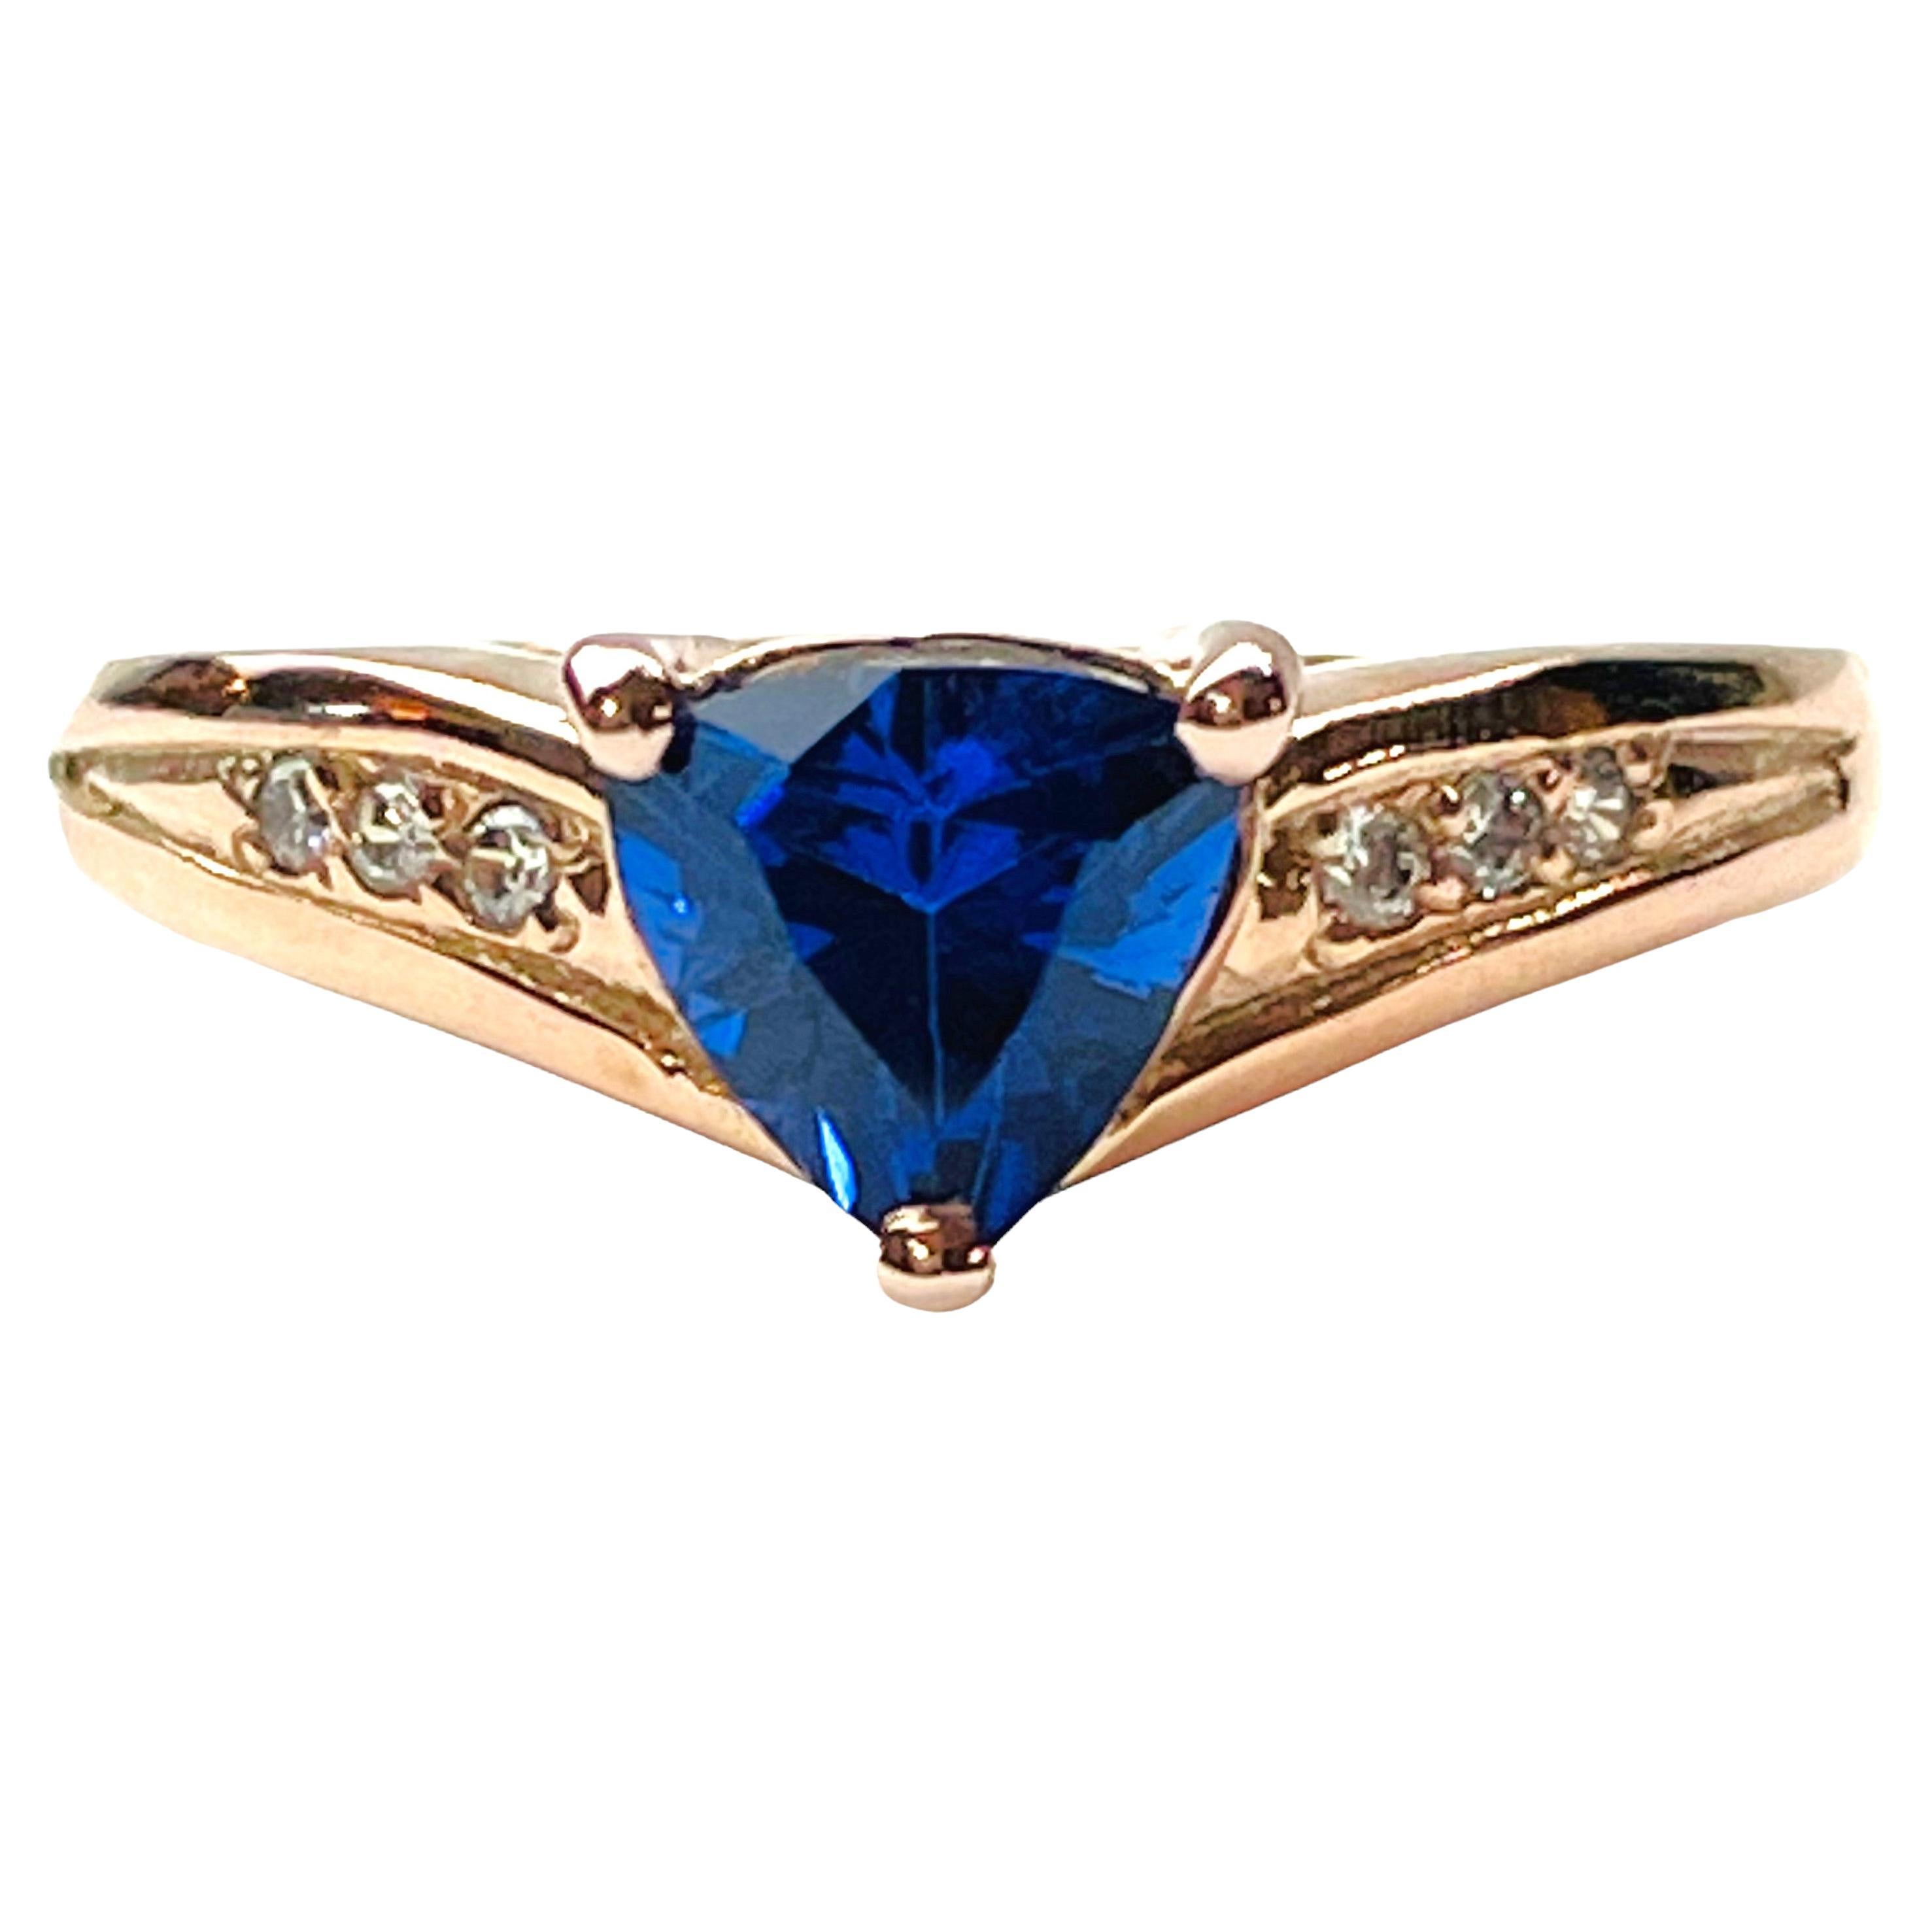 New IF 1.0 Ct African Kashmir Blue Sapphire Trillion Cut 14k GP Sterling Ring